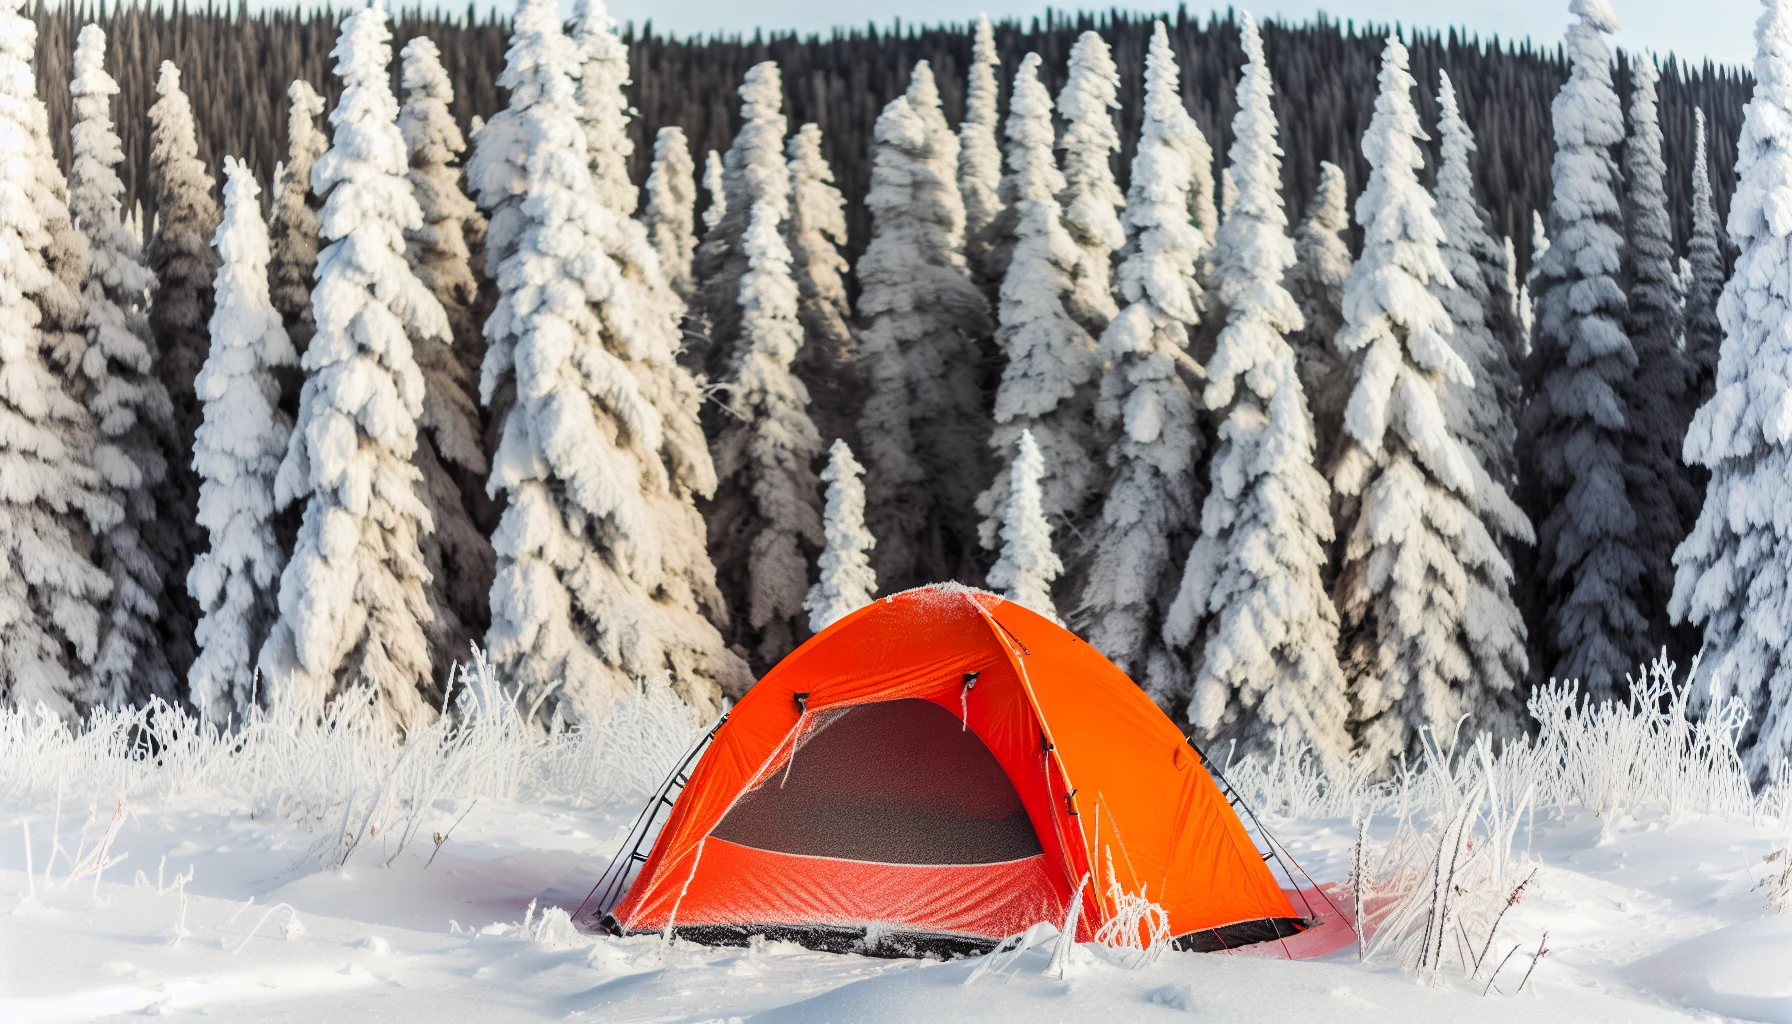 Insulated tent in a snowy outdoor setting